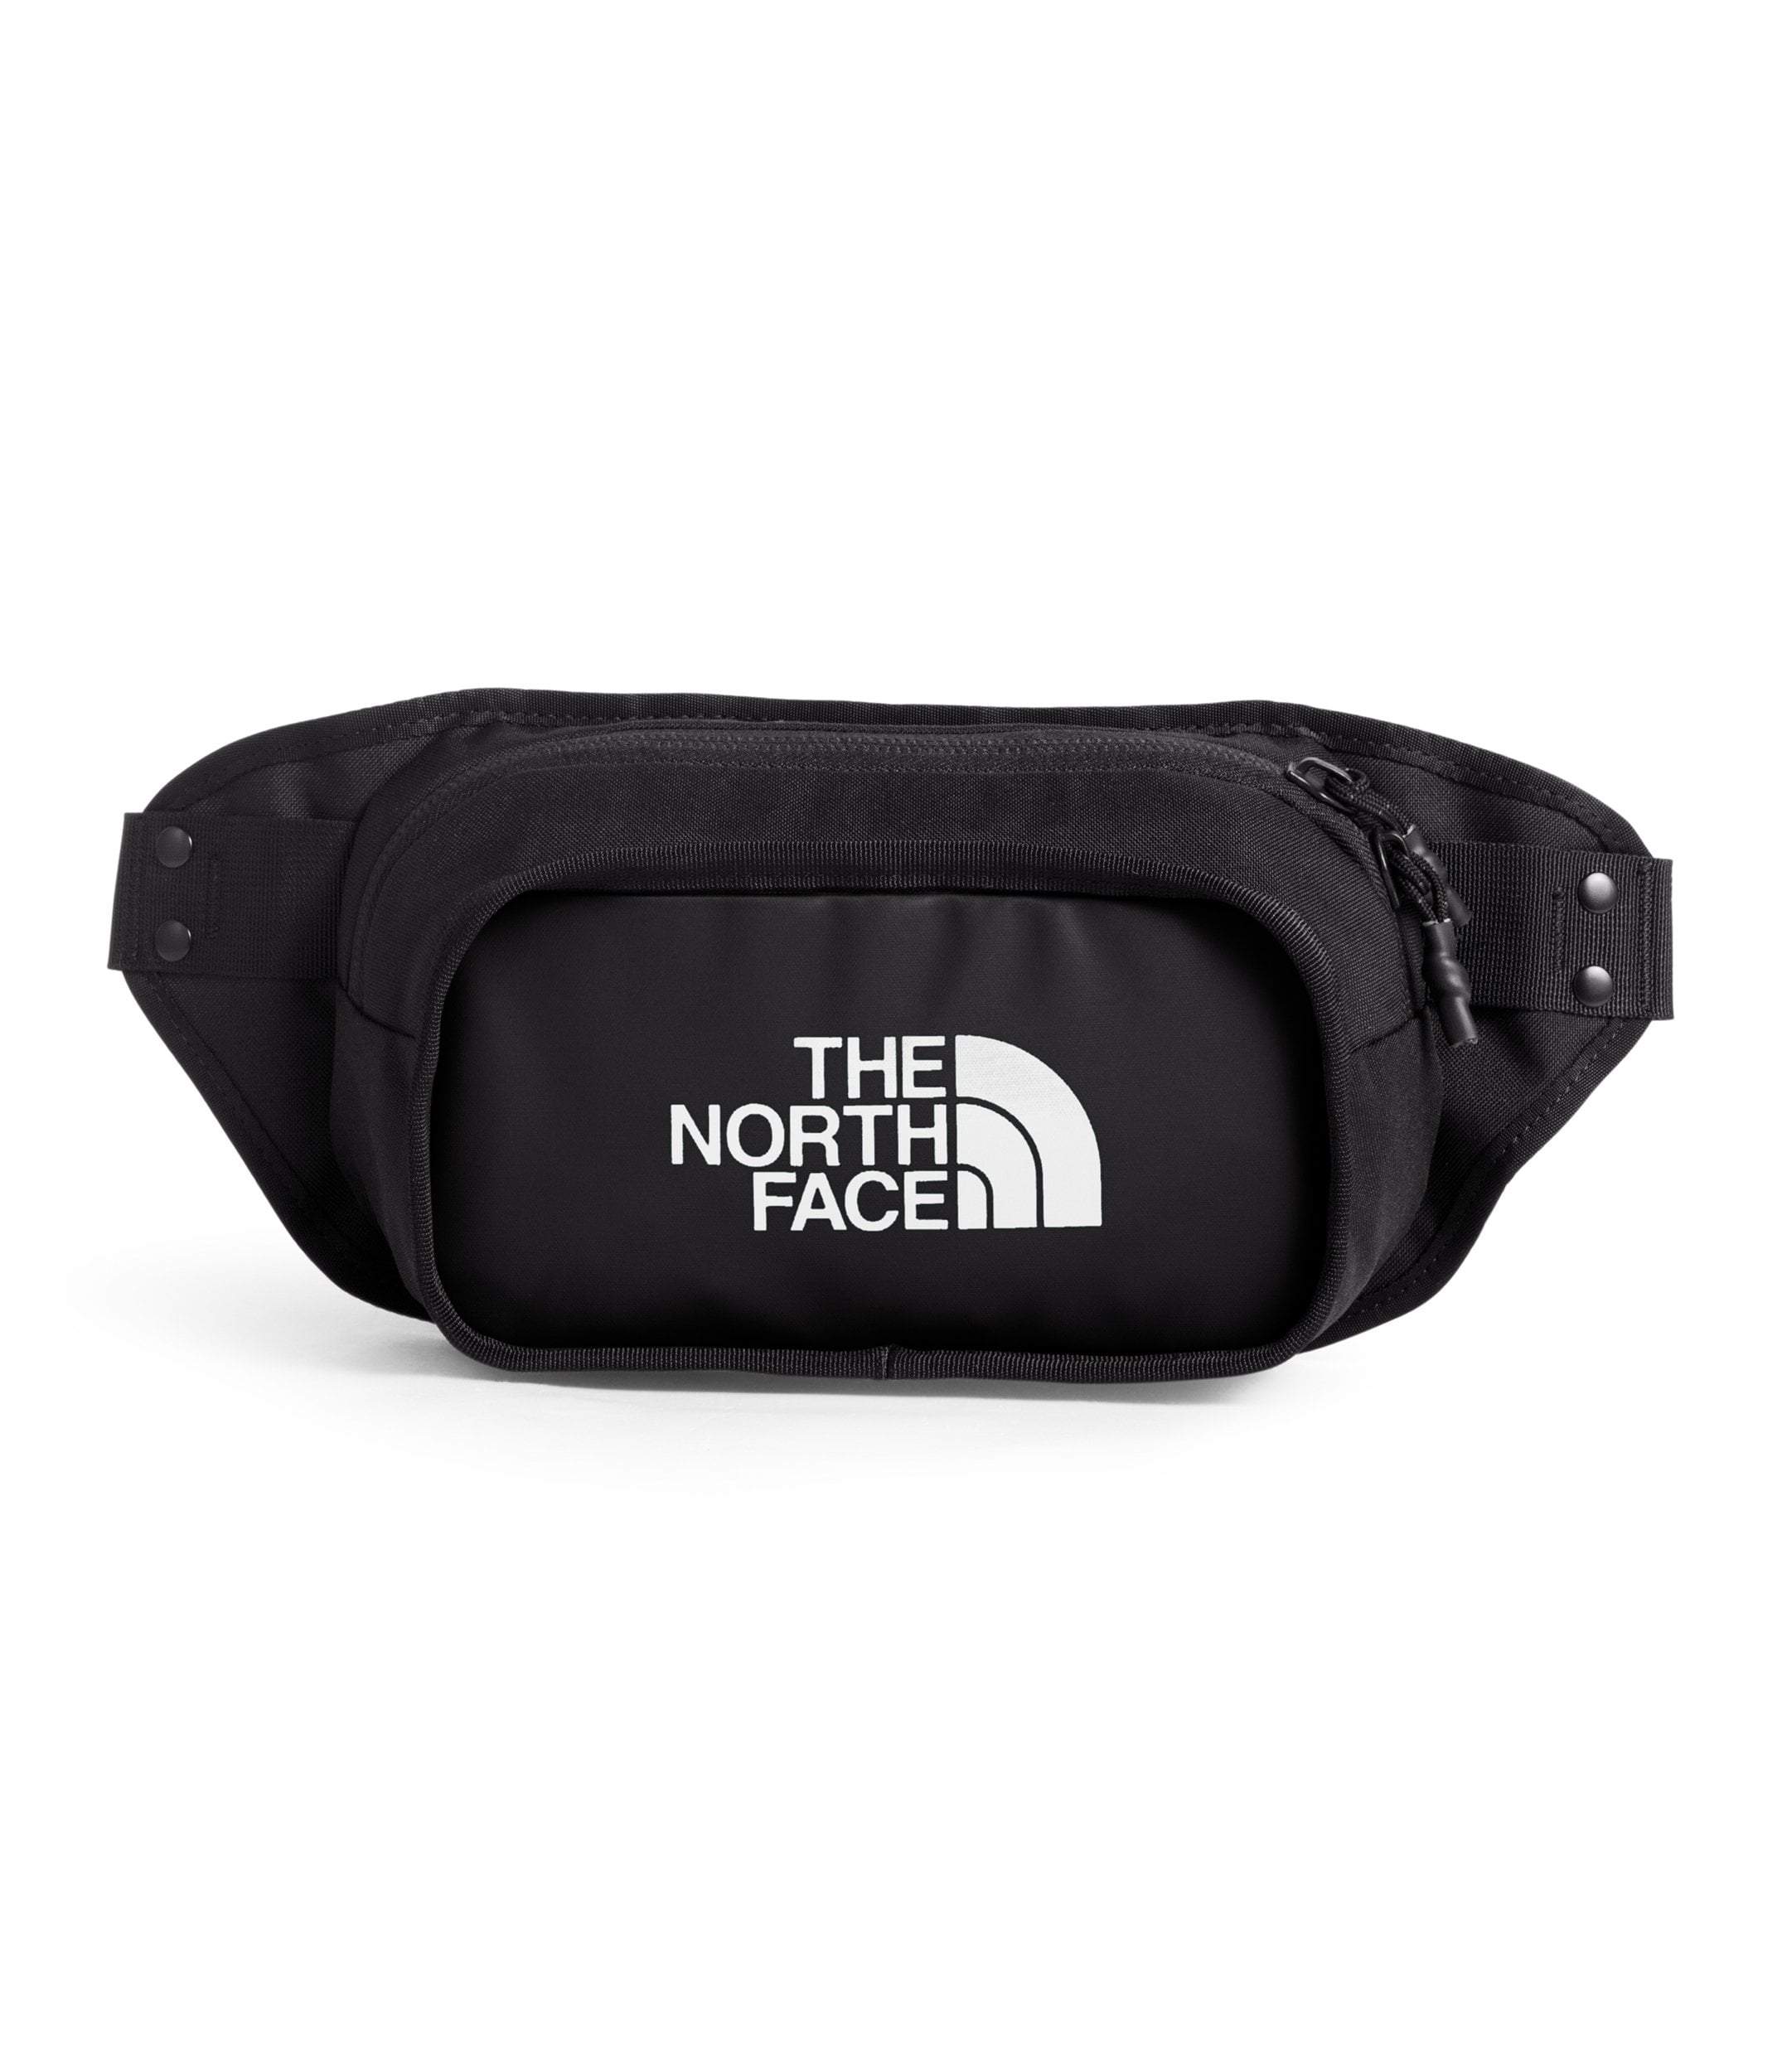 CDG THE NORTH FACE EXPLORE HIP PACK 即日発送